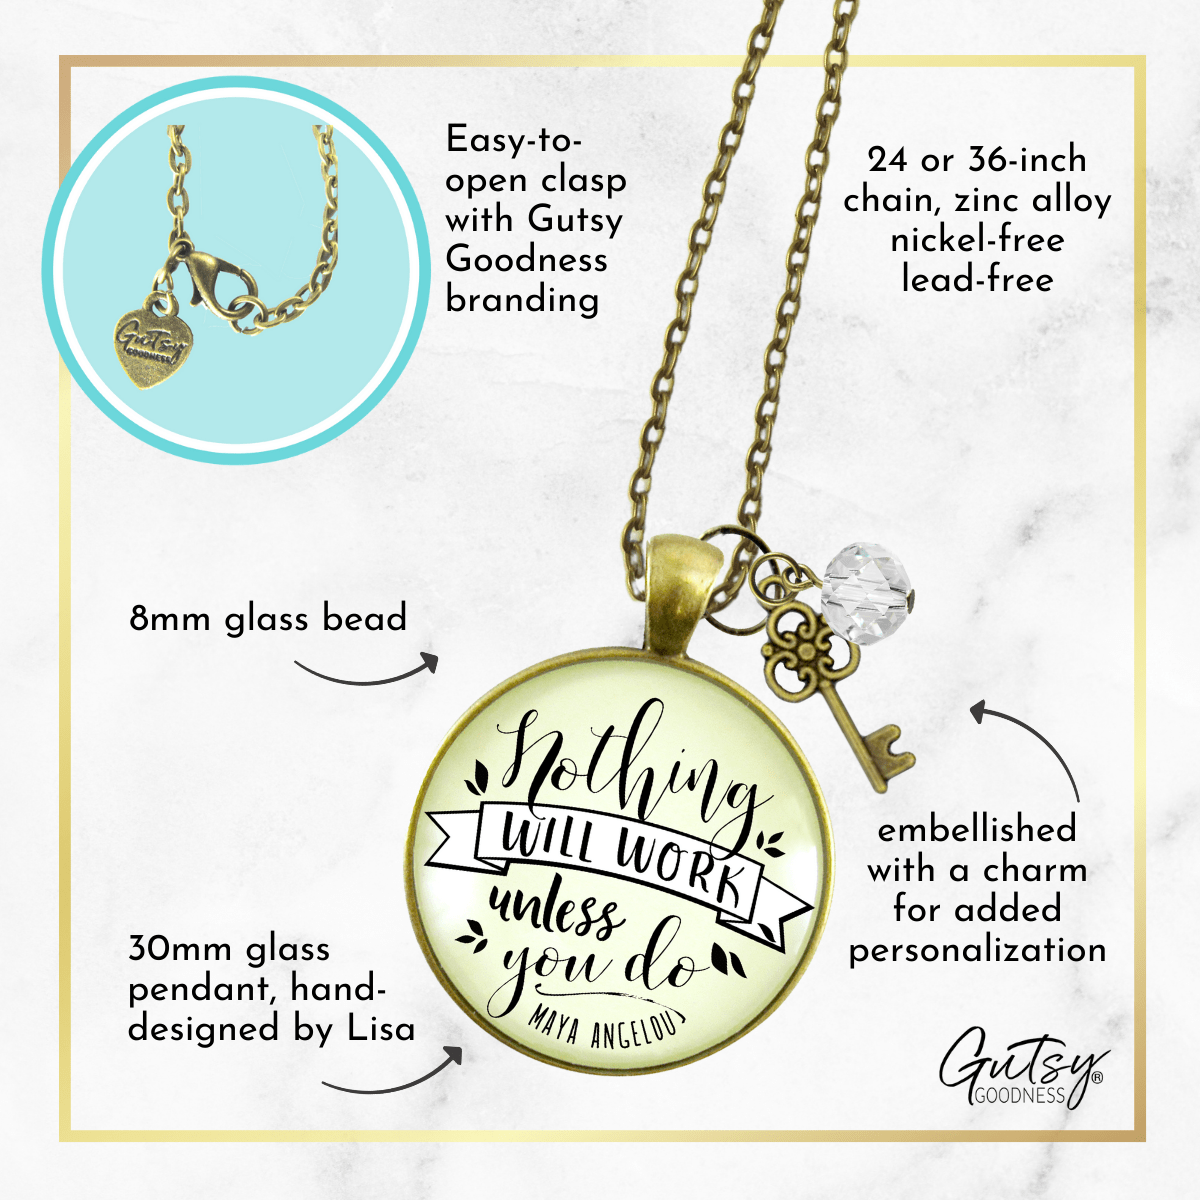 Gutsy Goodness Hustle Necklace Nothing Will Work Unless You Do Mantra Jewelry Entrepreneur Gift - Gutsy Goodness Handmade Jewelry;Hustle Necklace Nothing Will Work Unless You Do Mantra Jewelry Entrepreneur Gift - Gutsy Goodness Handmade Jewelry Gifts